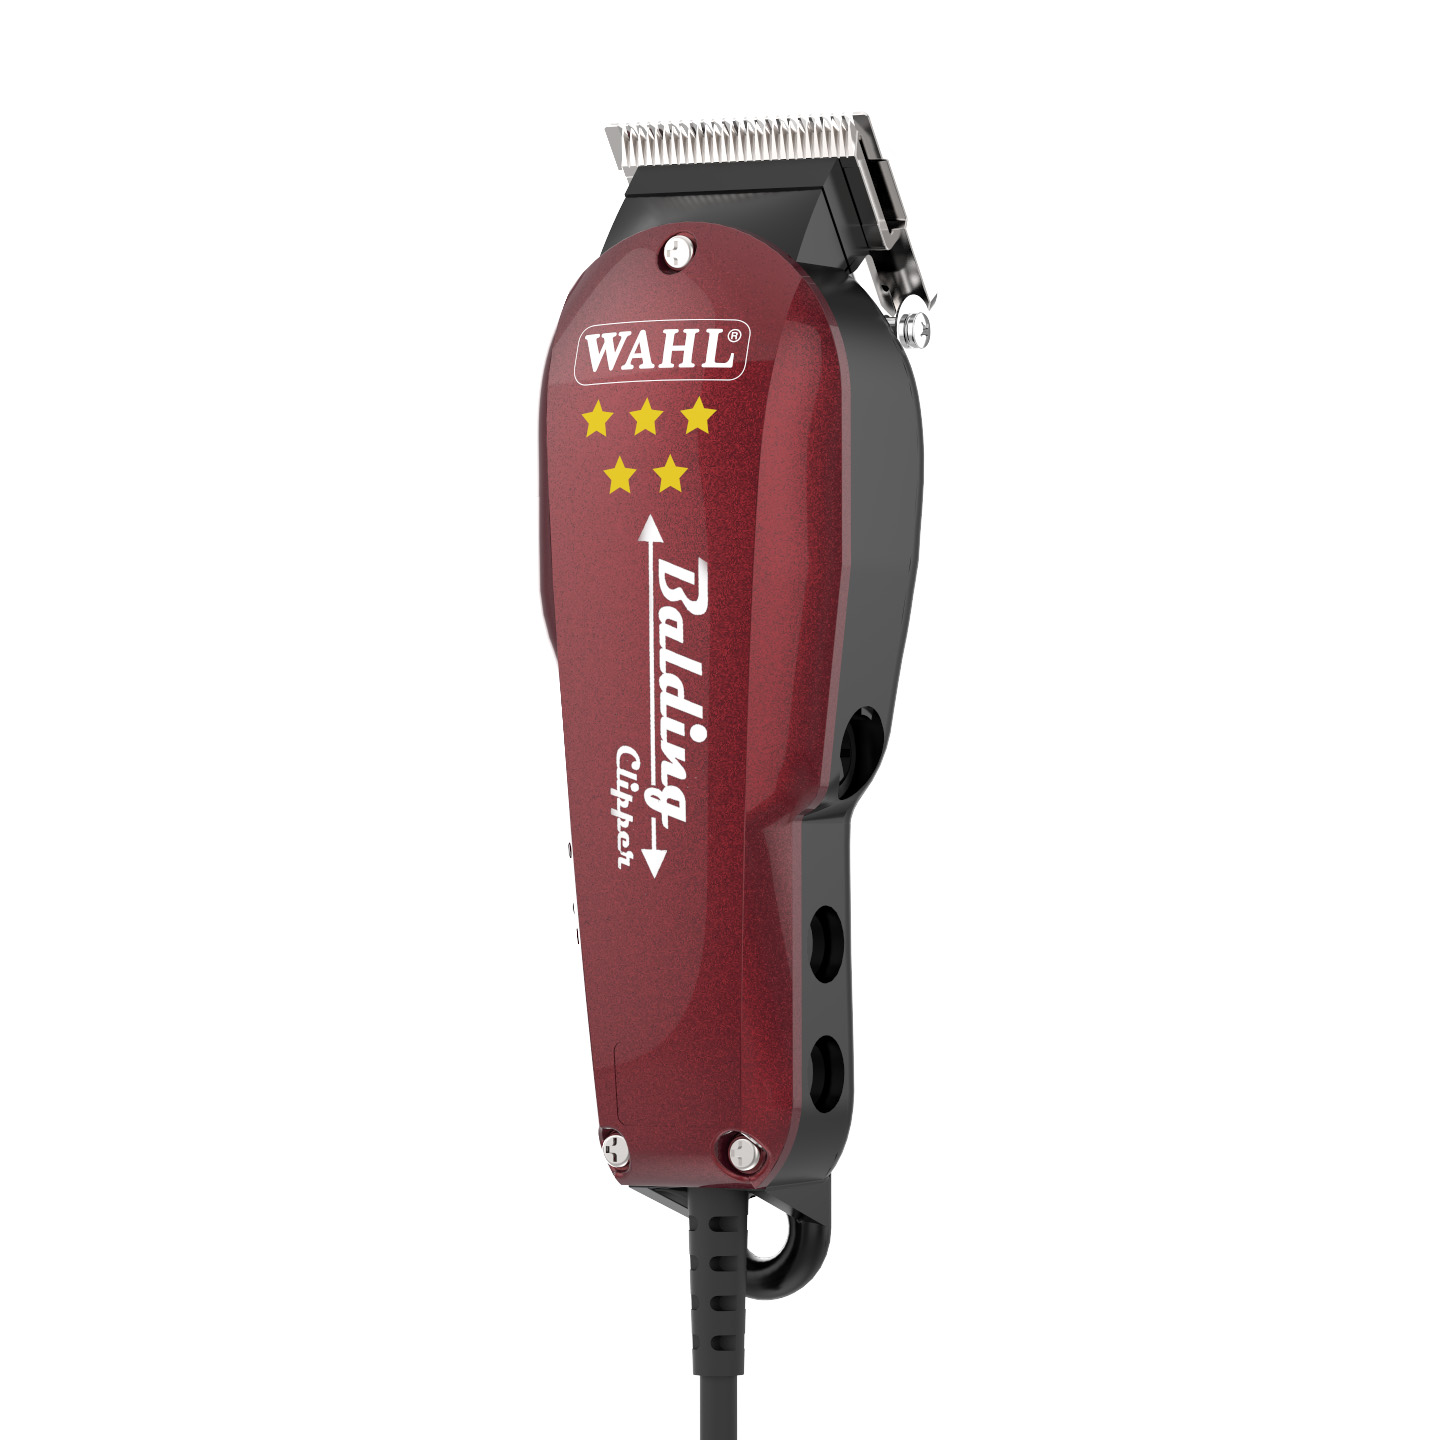 balding clippers